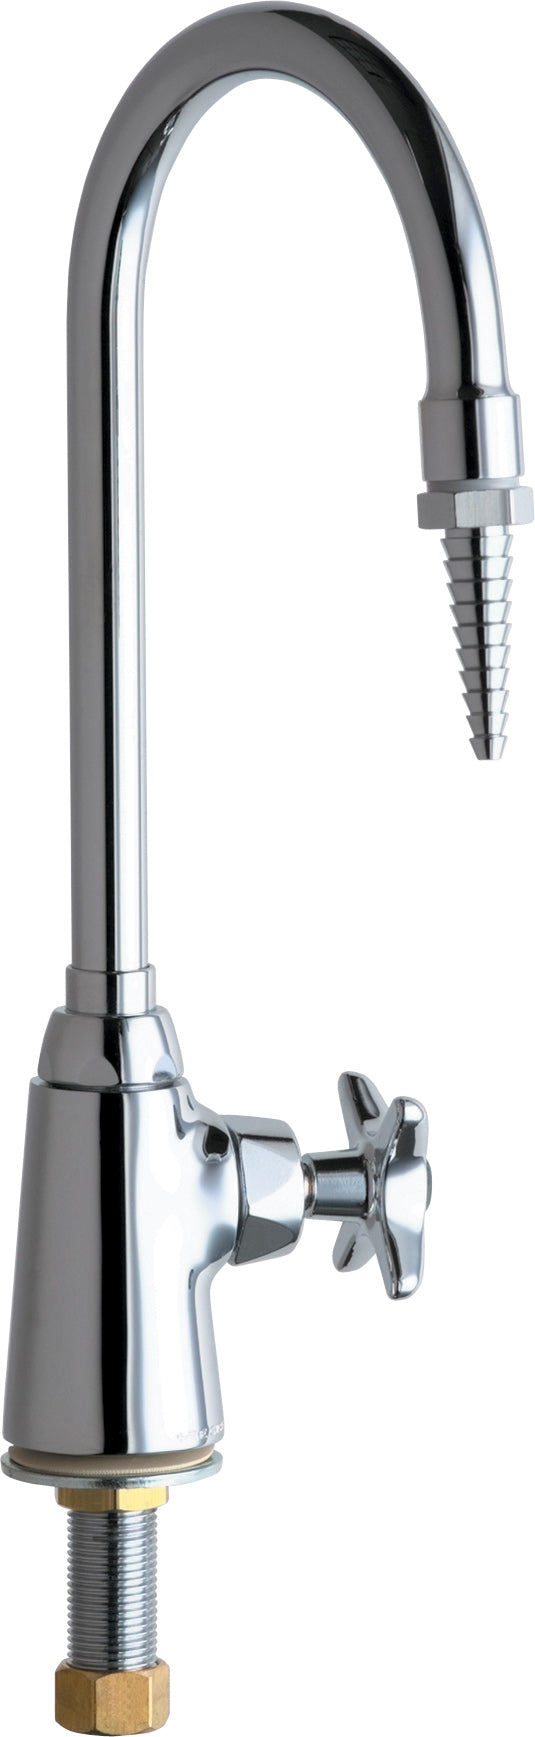 Chicago Faucets Laboratory Sink Faucet 927-CP